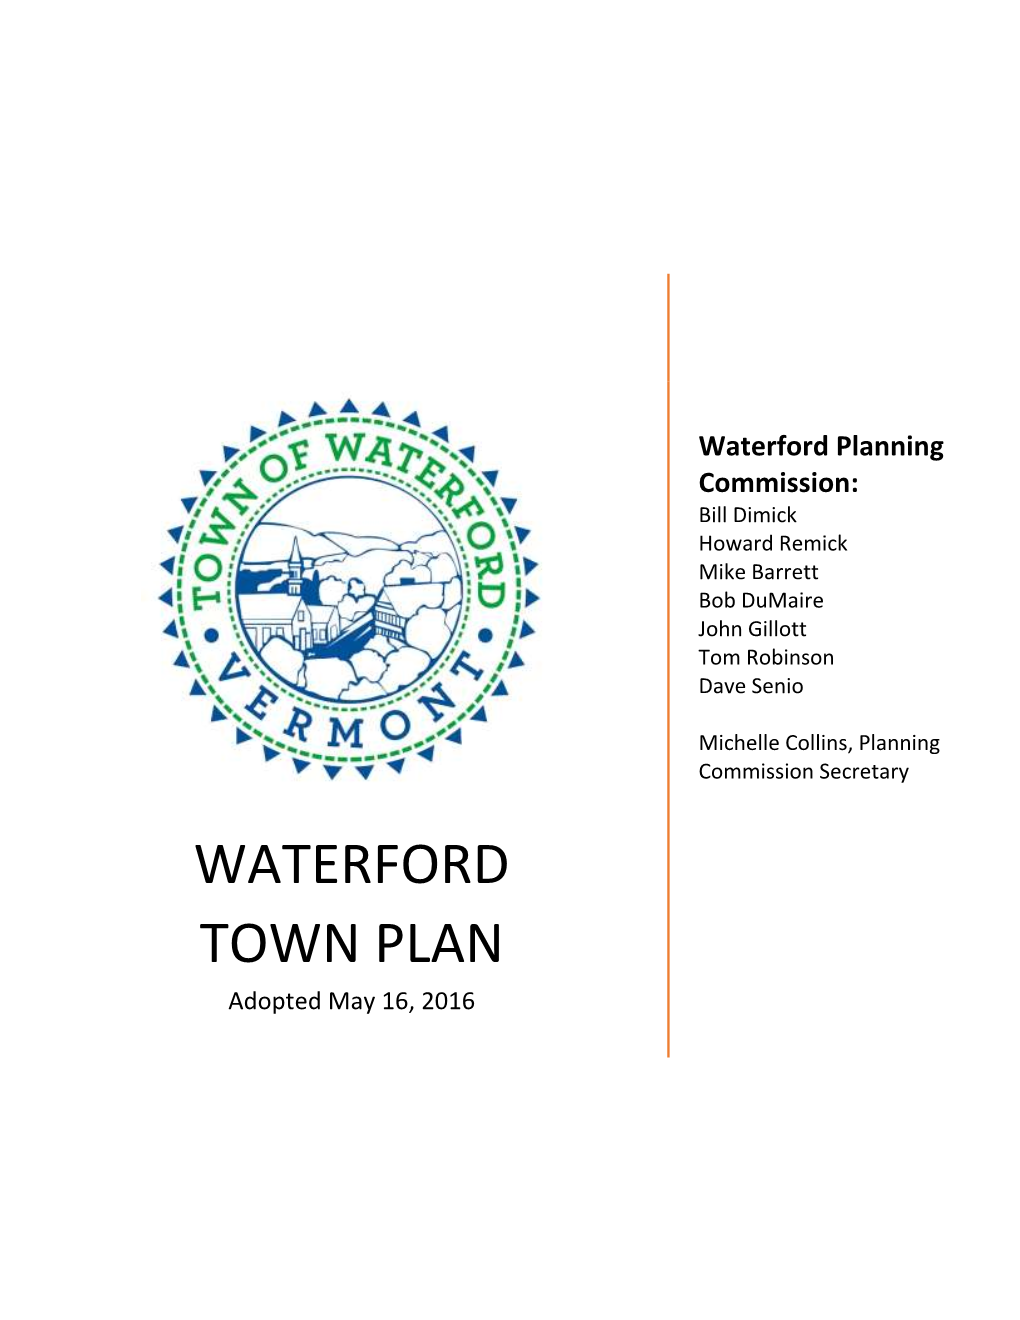 WATERFORD TOWN PLAN Adopted May 16, 2016